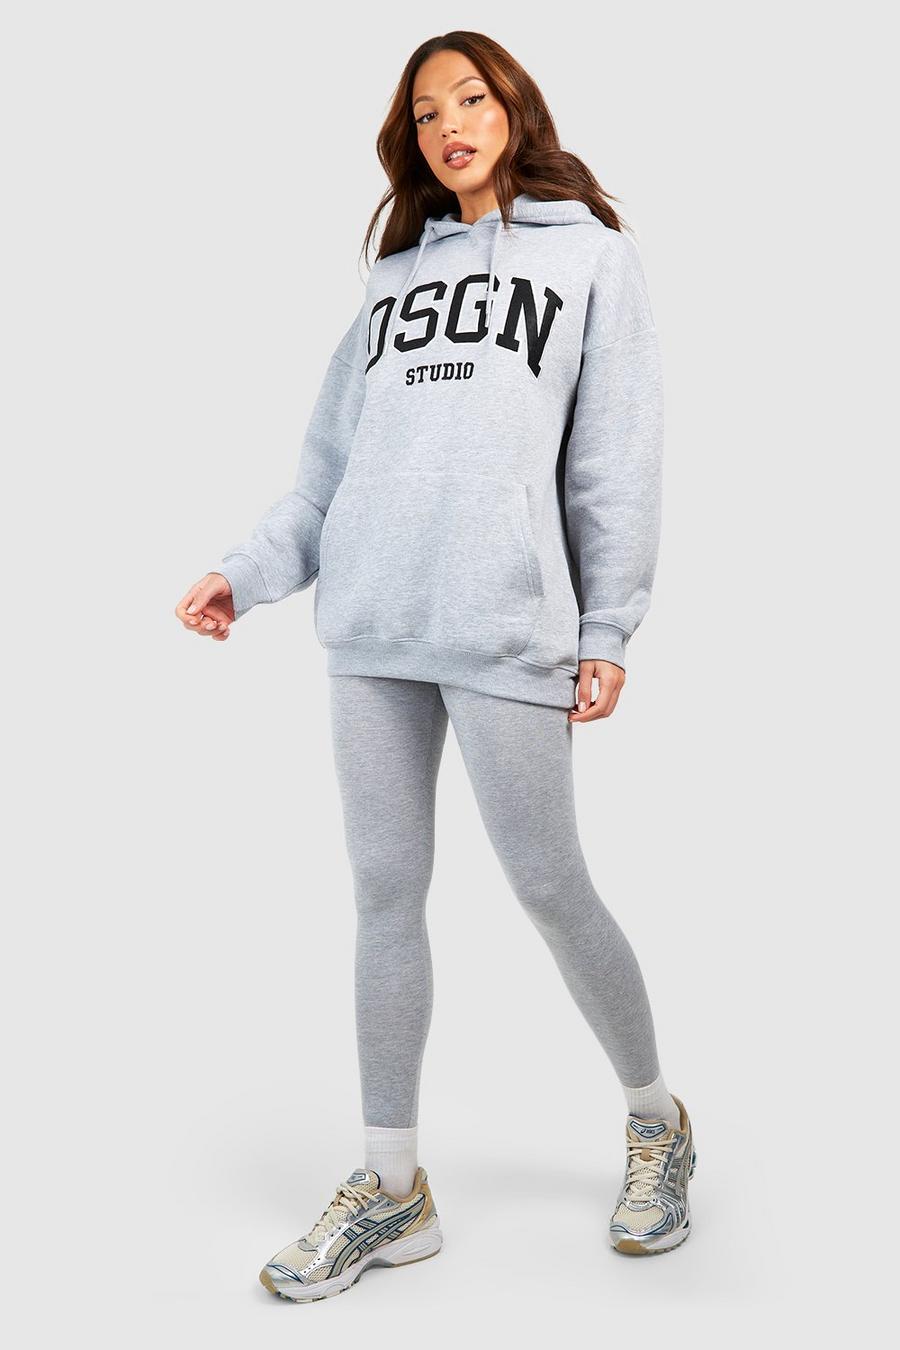 Grey marl gris Tall Dsgn Studio Emroidered Hoodie And Legging Set